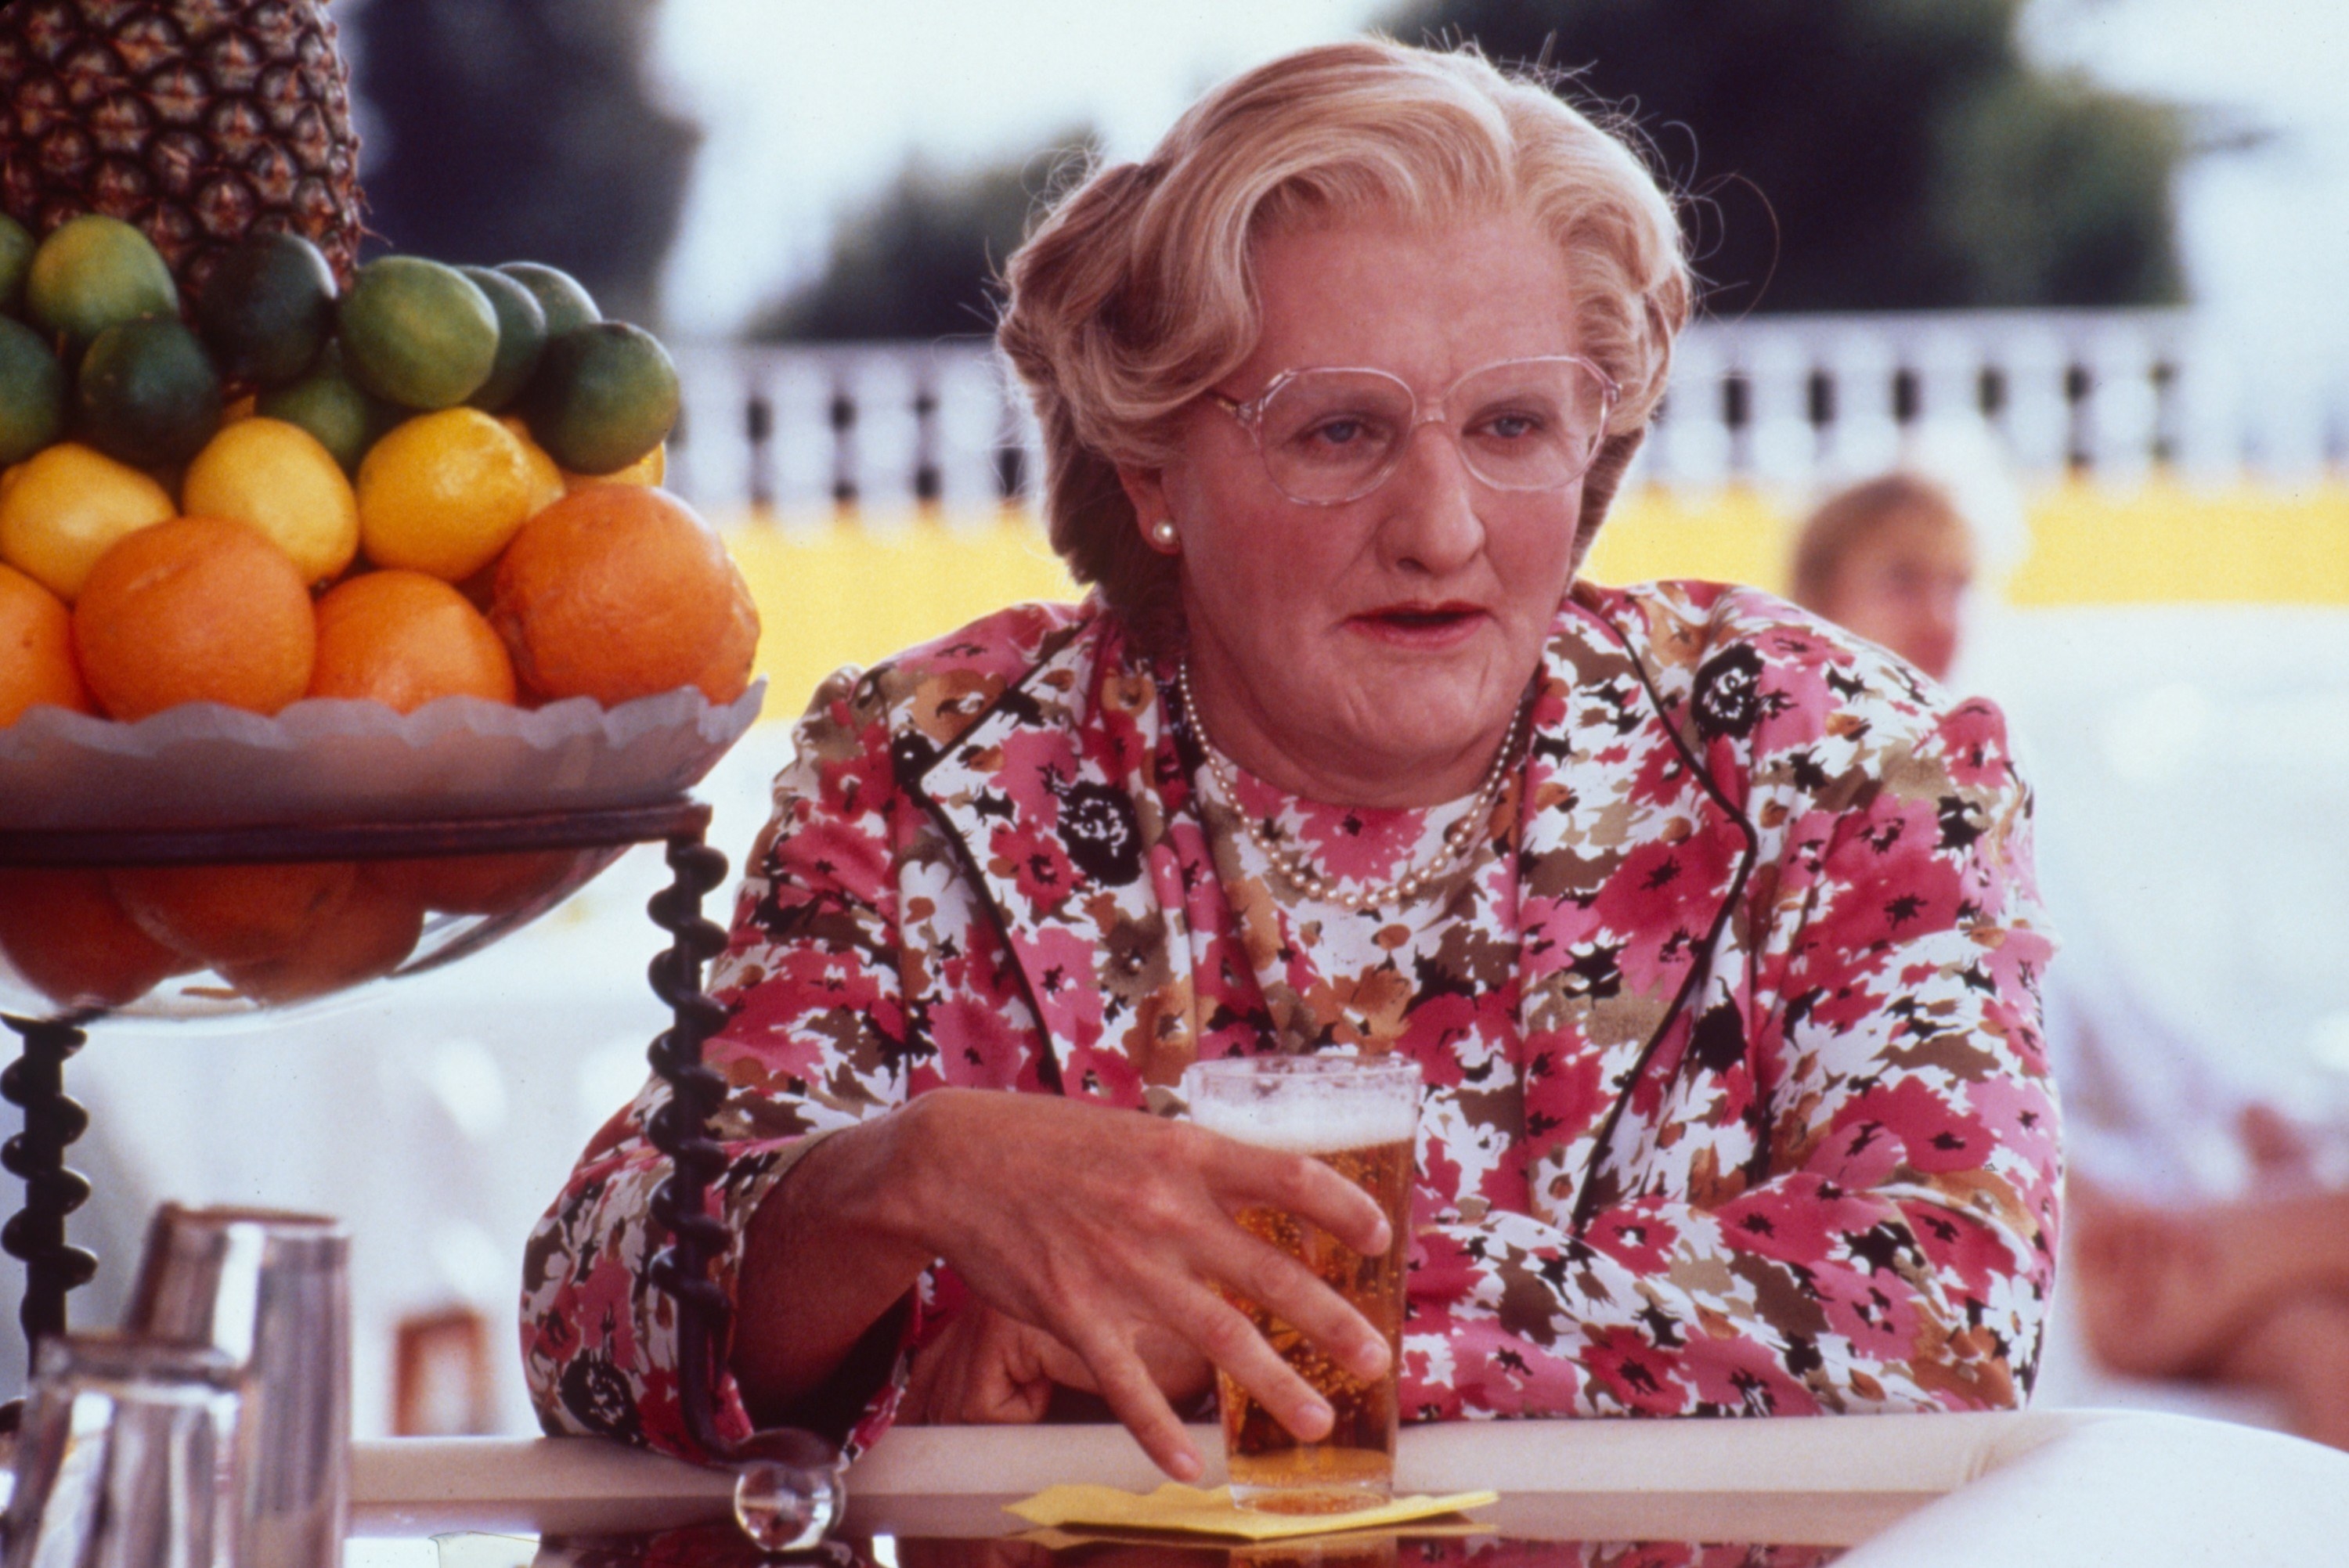 Mrs Doubtfire sitting next to a bowl of fruit holding a glass of beer